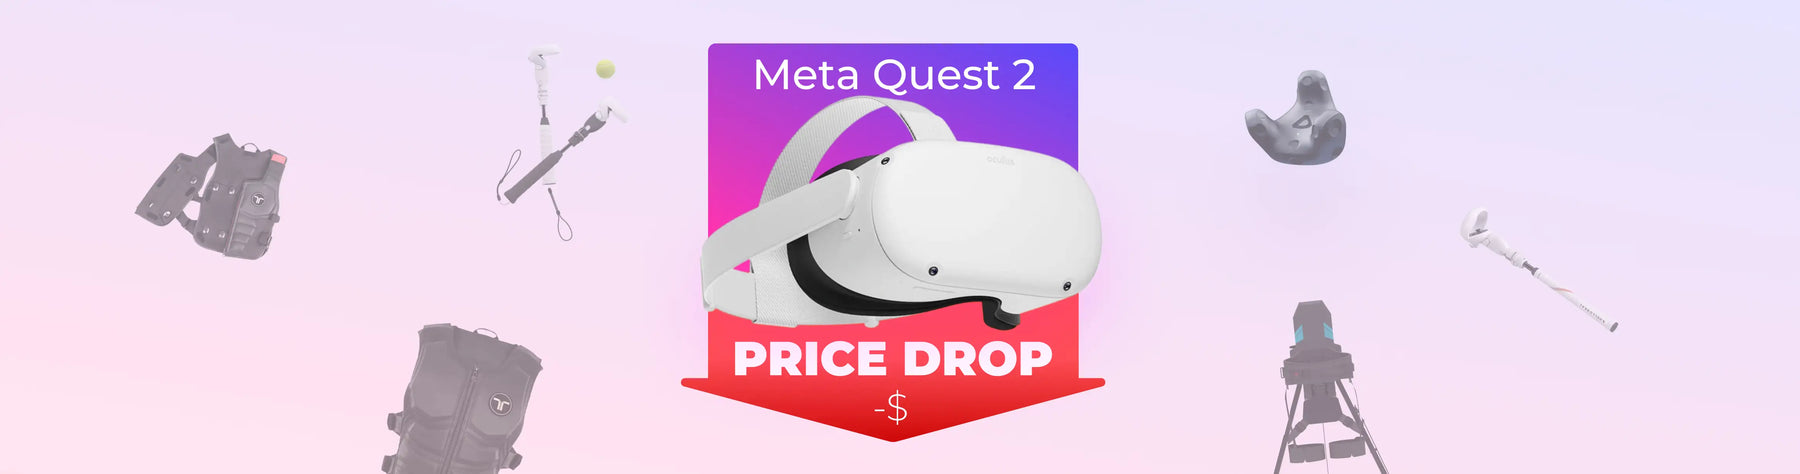 Meta's Quest 2 Price Drop and Knoxlabs' Wide Range of Accessories